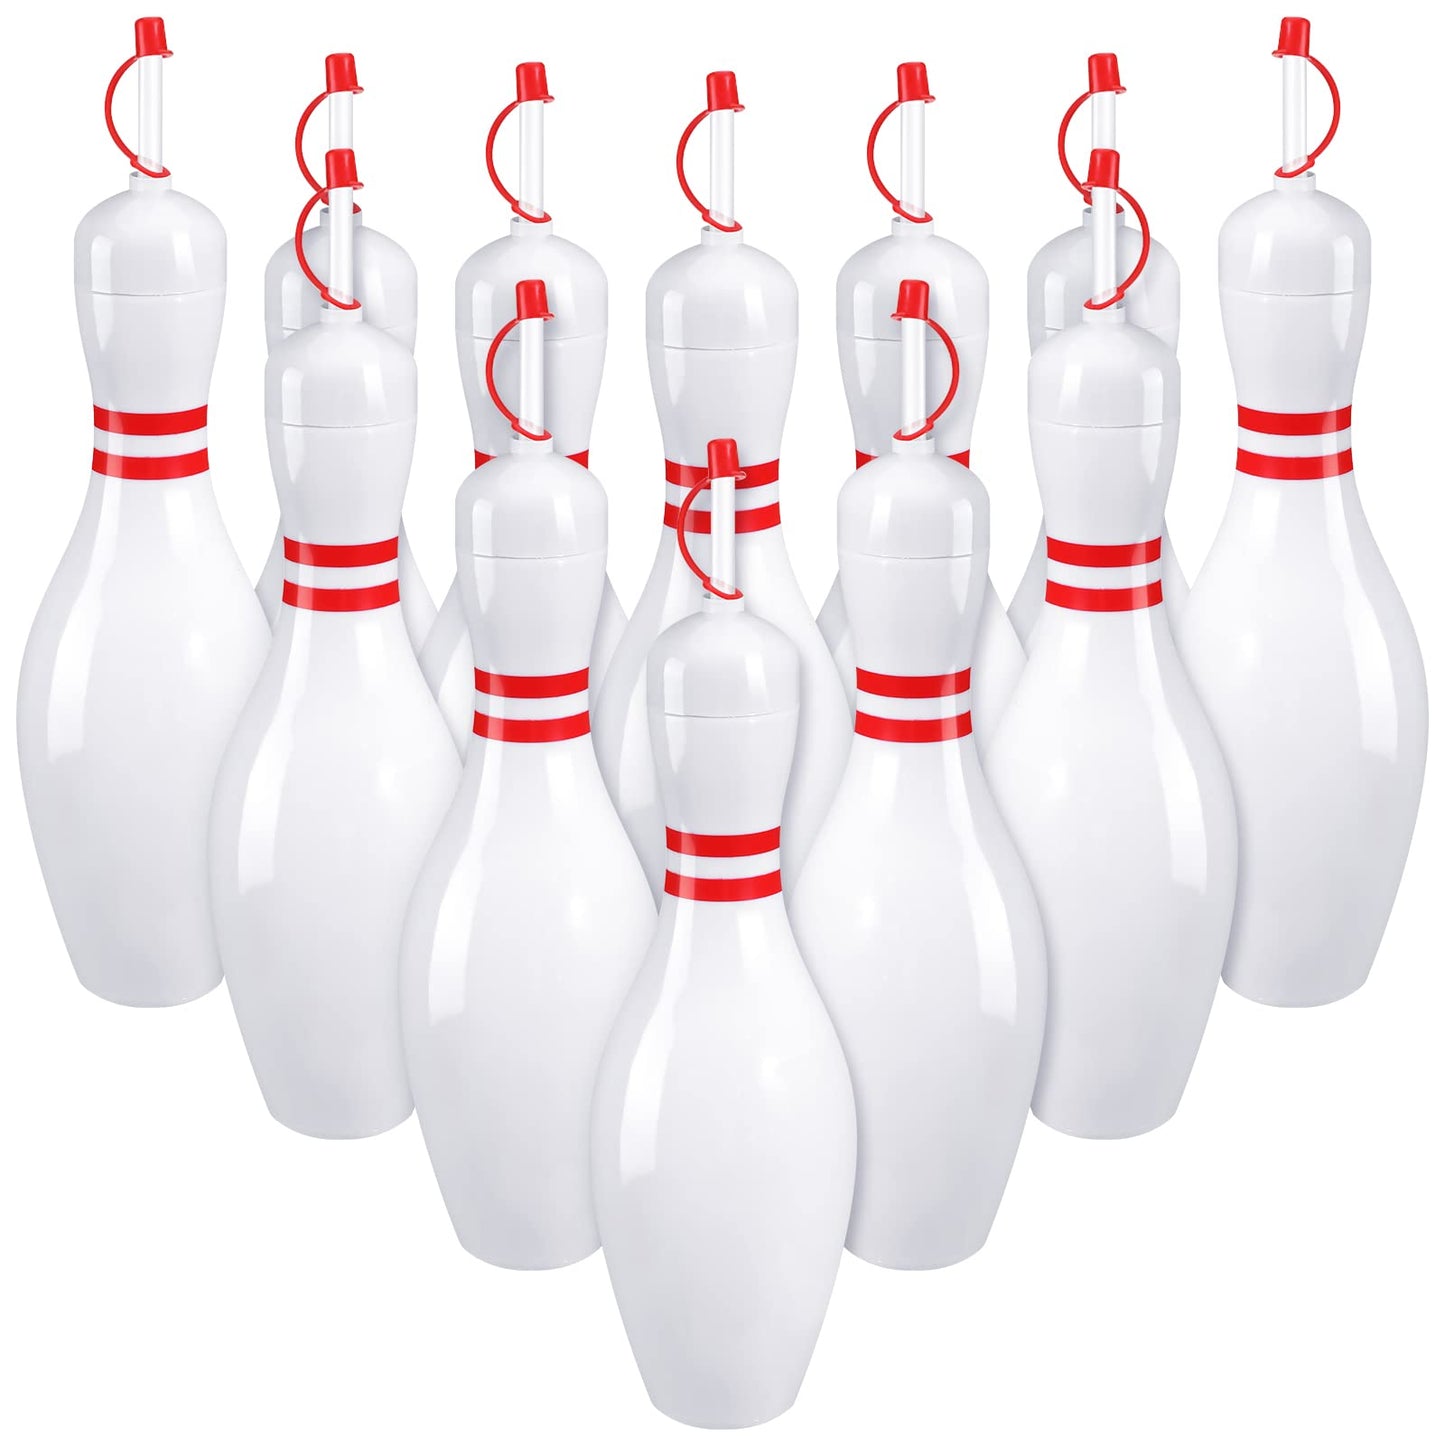 Bowling Pin Water Bottles with Straws and Lids 25 oz Plastic Reusable Bowling Pin Cups Bowling Party Favors for Kids Birthday Sports Competition Bowling Fans Players Party Drinking Decoration (24)